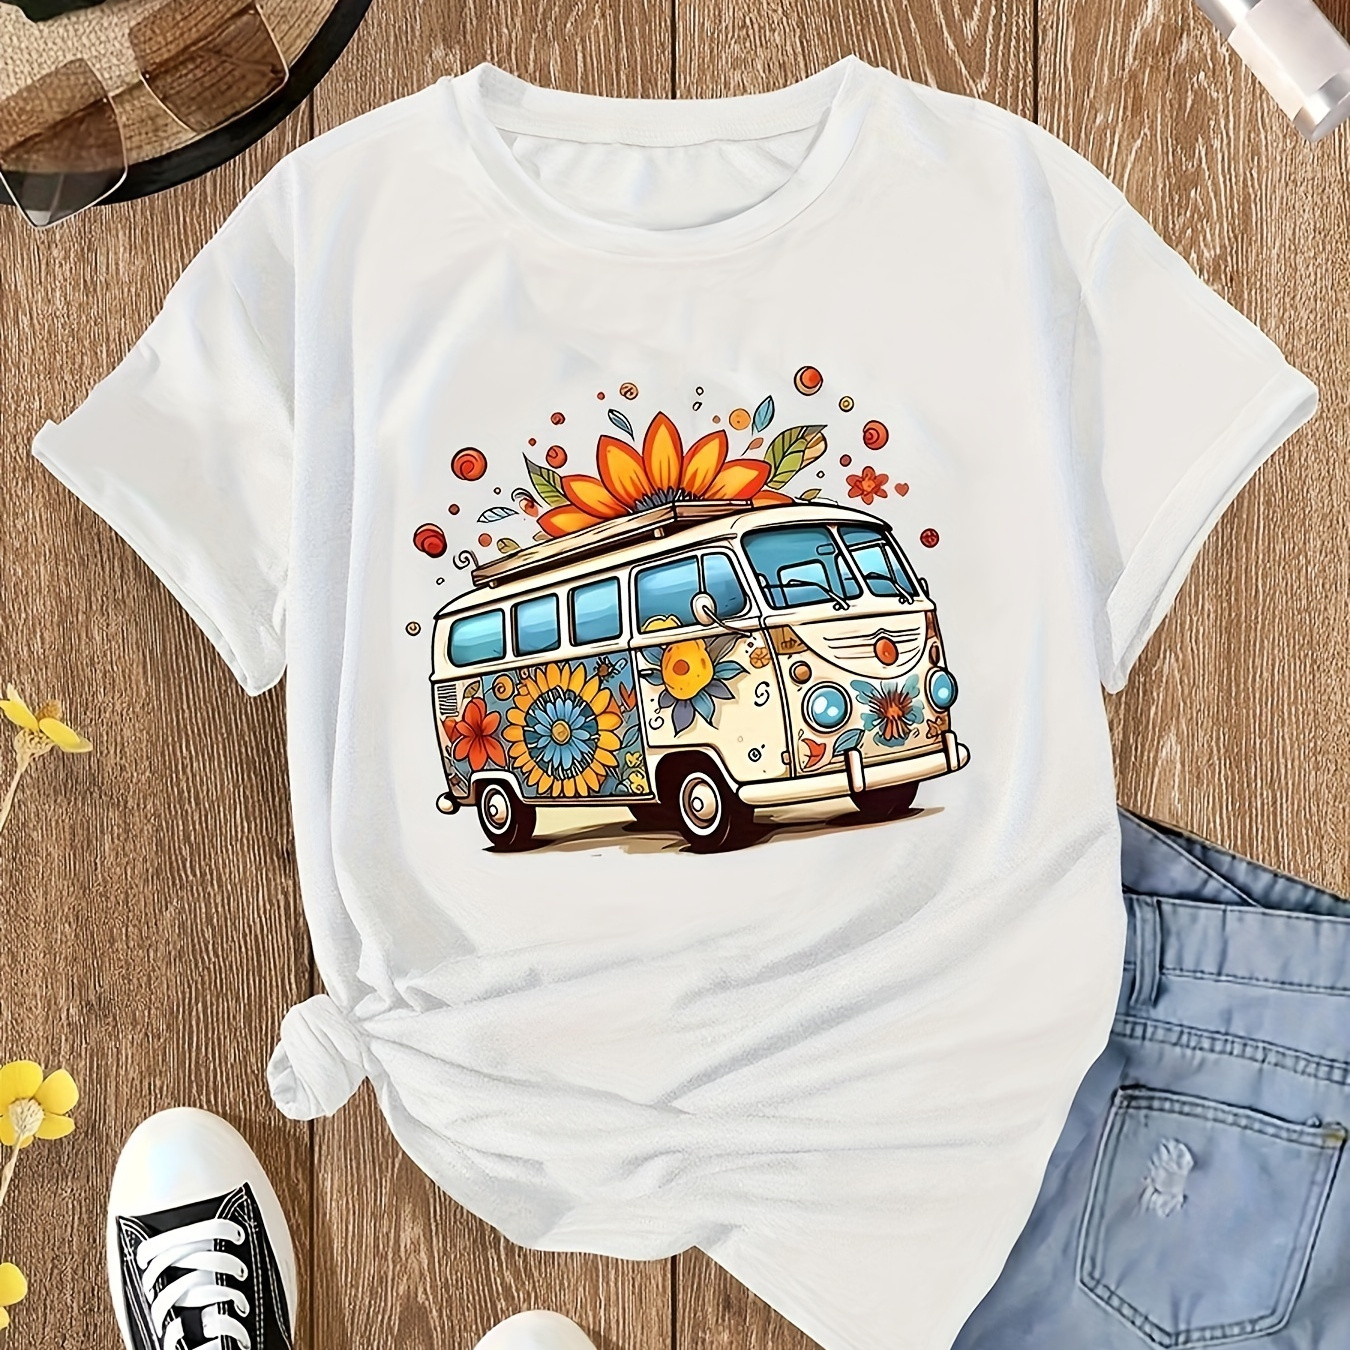 

Floral Bus Pattern Crew Neck T-shirt, Casual Short Sleeve T-shirt For Spring & Summer, Women's Clothing